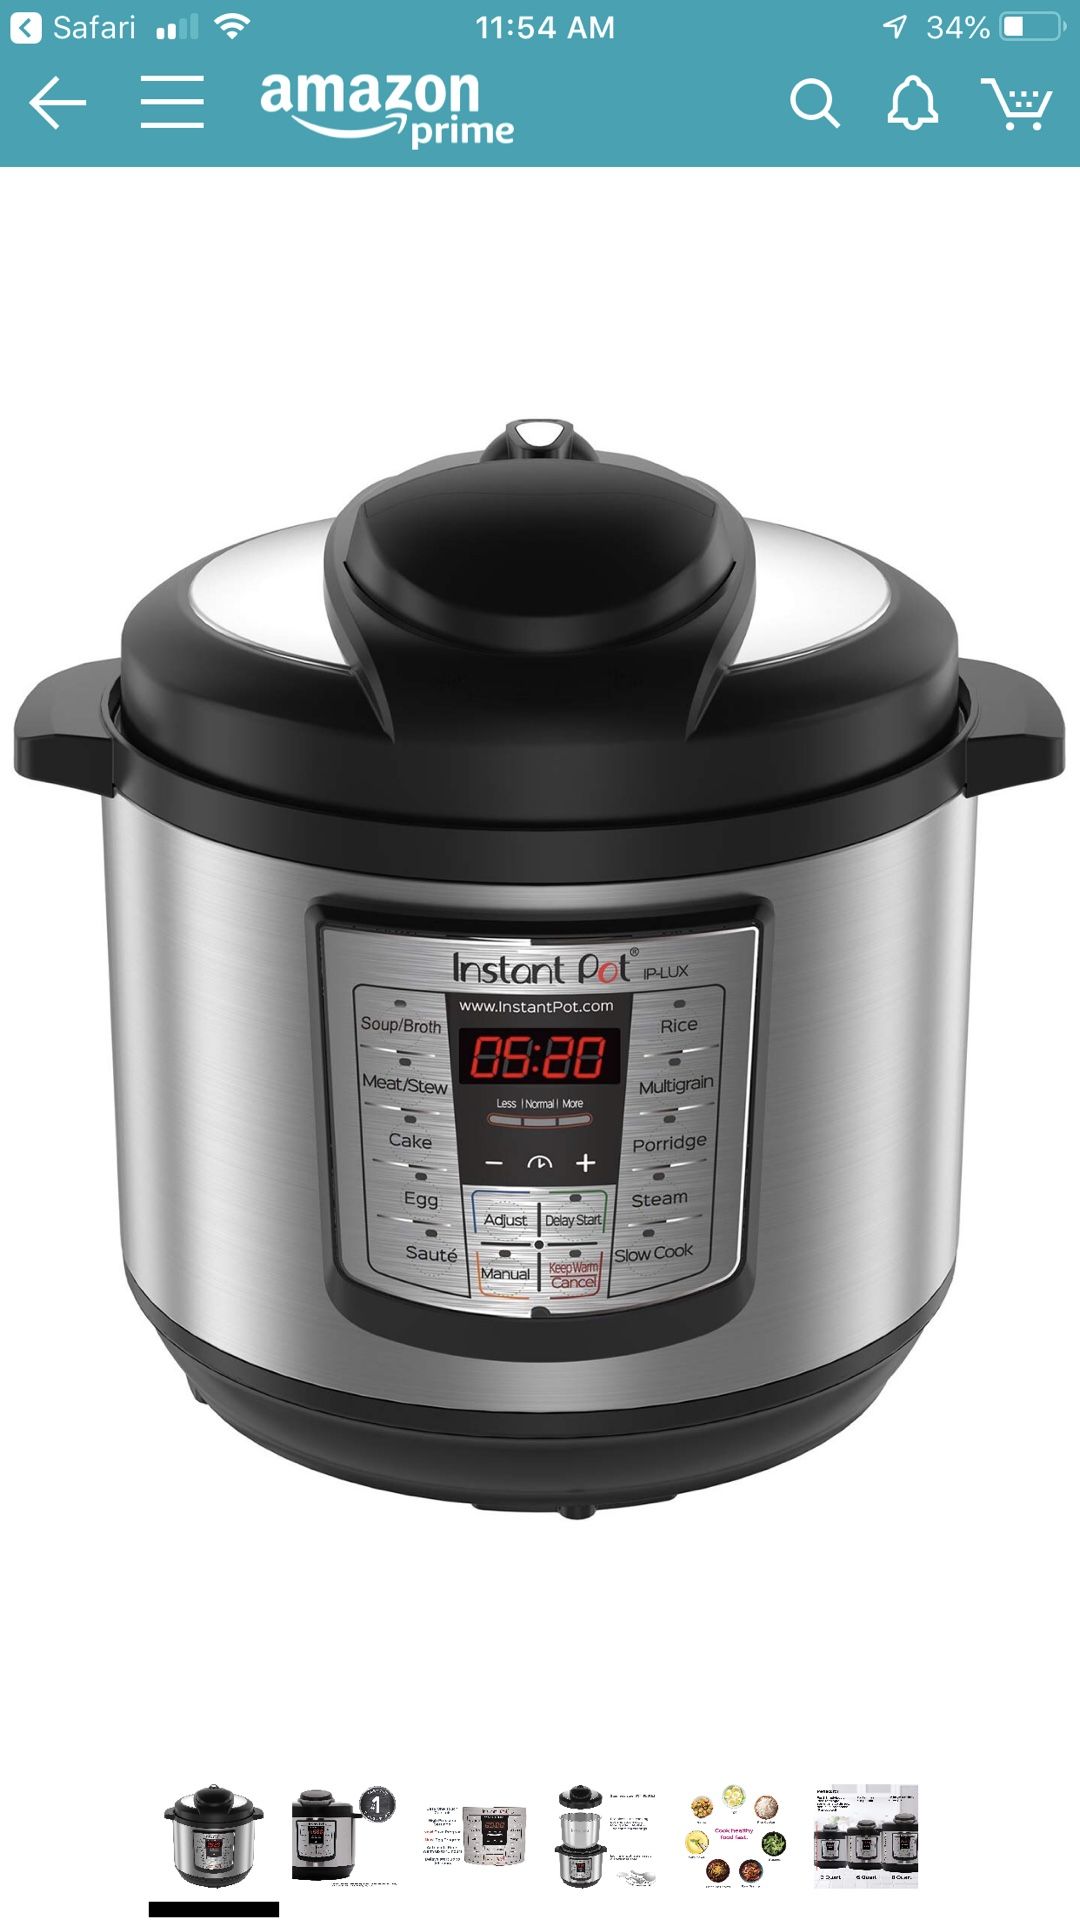 Instant Pot LUX80 8 Qt 6-in-1 Multi- Use Programmable Pressure Cooker, Slow Cooker, Rice Cooker, Sauté, Steamer, and Warmer